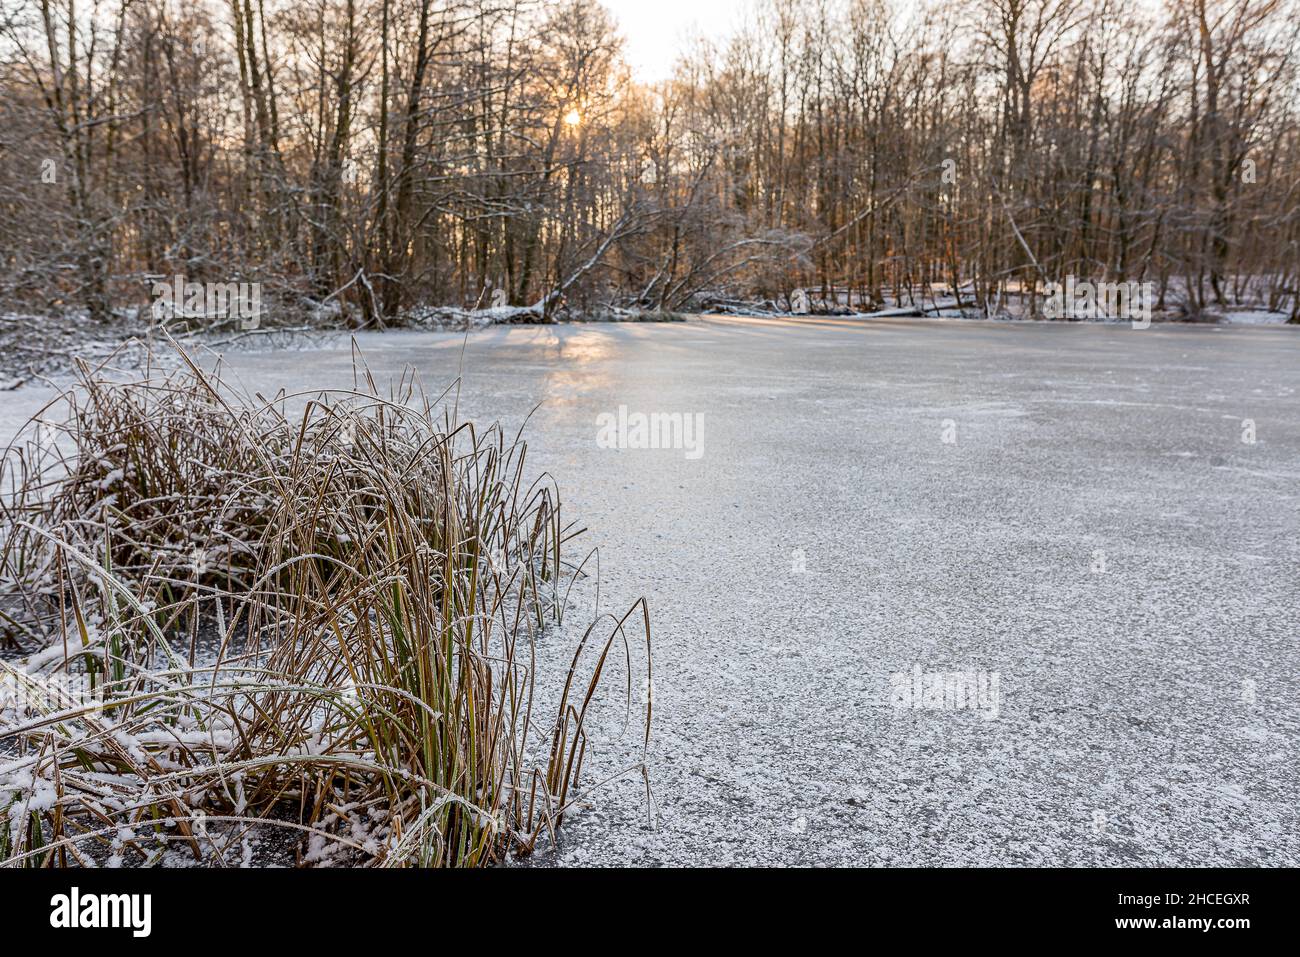 Frozen reeds on the shore of an icy lake in the faint sunshine, Zealand, Denmark, January 27, 202 Stock Photo